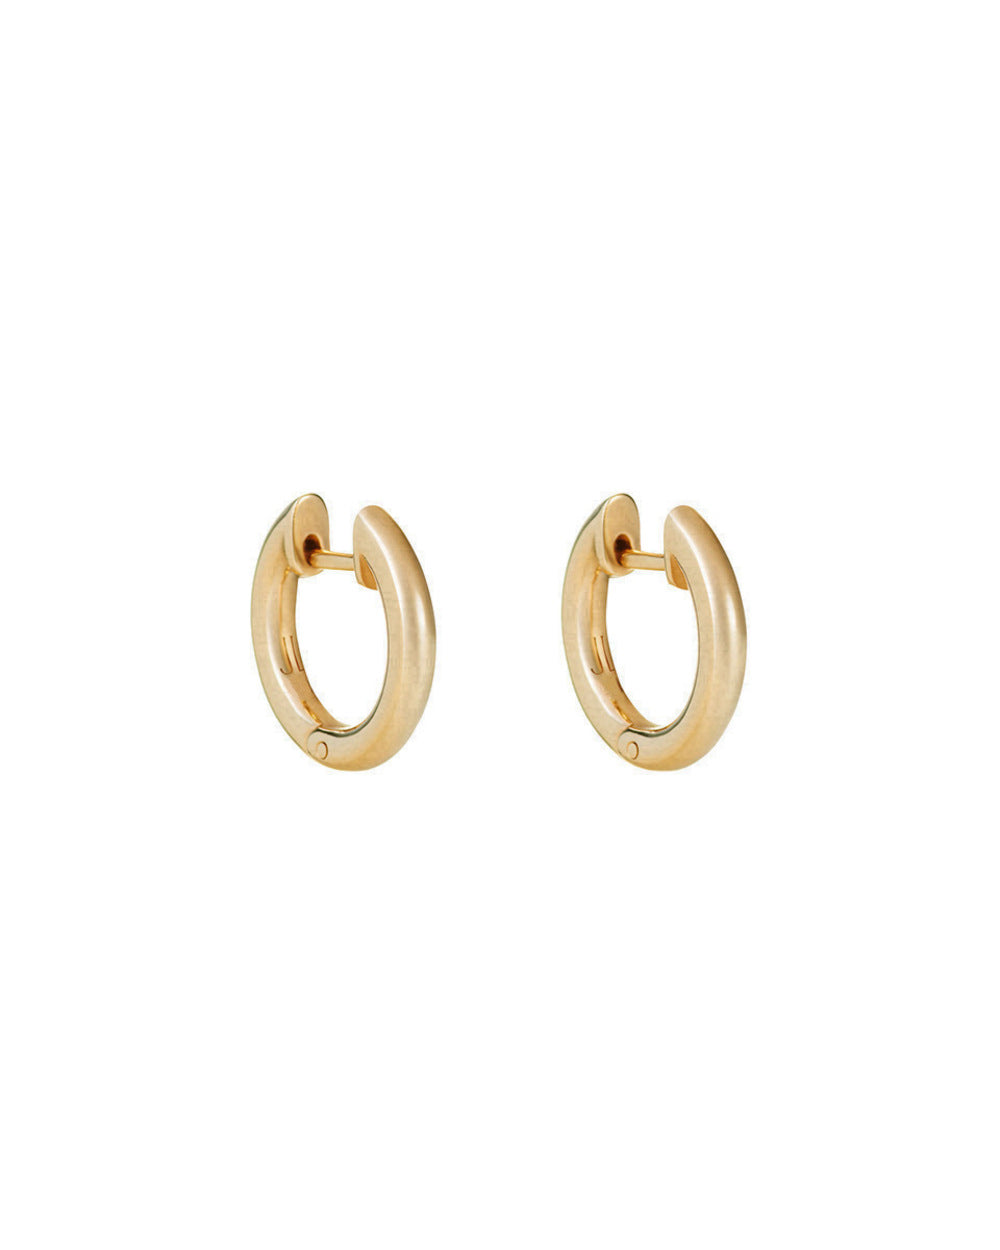 K18 Basic hoops S earrings made of brass plated with 24K gold / diameter 16.5 mm